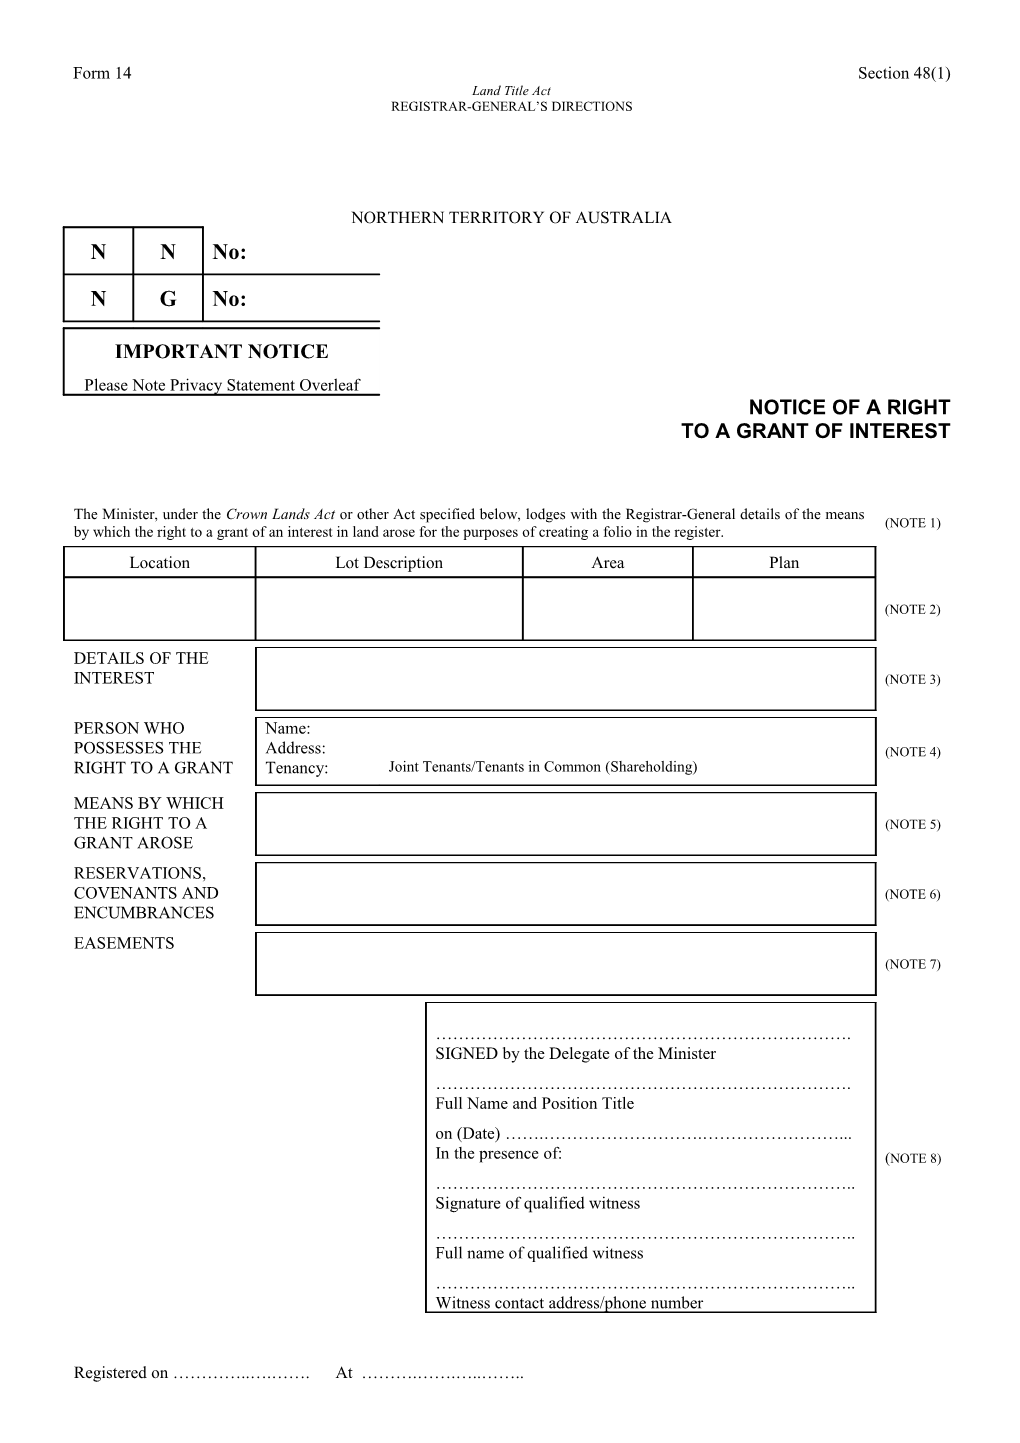 Form No. 14 - Notice of a Right to a Grant of Interest